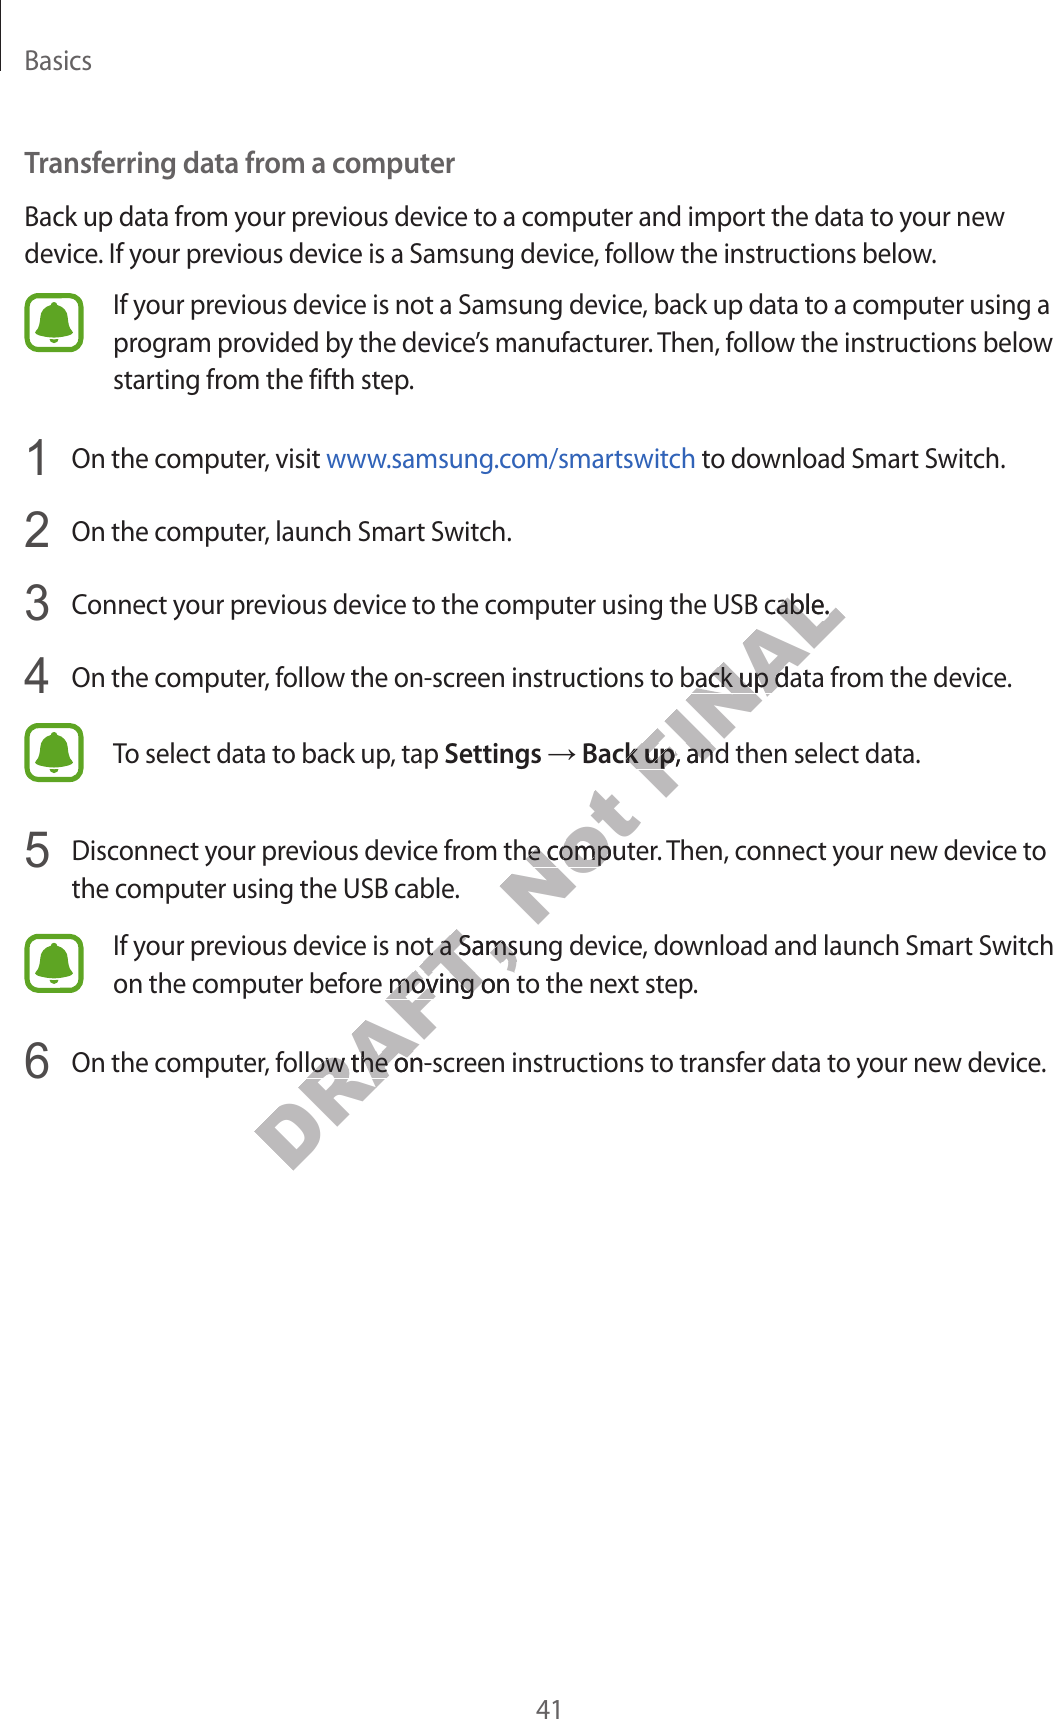 Basics41Transferring data fr om a c omputerBack up data from y our pr evious devic e to a c omput er and import the data to your new device . If your pr evious device is a Samsung device, follow the instructions below.If your previous device is not a Samsung devic e , back up data t o a comput er using a progr am pr o vided by the devic e’s manufacturer. Then, follow the instructions below starting from the fifth step .1  On the computer, visit www.samsung.com/smartswitch to do wnload Smart Switch.2  On the computer, launch Smart Switch.3  Connect your pr evious device t o the comput er using the USB cable .4  On the computer, follow the on-scr een instructions to back up data fr om the device.To select data to back up , tap Settings → Back up, and then select data.5  Disconnect your previous devic e fr om the comput er. Then, connect your new device to the computer using the USB cable .If your previous device is not a Samsung devic e , do wnload and launch Smart Switch on the computer bef or e mo ving on t o the next step.6  On the computer, follow the on-scr een instructions to transf er da ta to y our new devic e .DRAFT, If your previous device is not a Samsung devic e , do wnload and launch Smart Switch DRAFT, If your previous device is not a Samsung devic e , do wnload and launch Smart Switch on the computer bef or e mo ving on t o the next step.DRAFT, on the computer bef or e mo ving on t o the next step.On the computer, follow the on-scr een instructions to transf er da ta to y our new devic e .DRAFT, On the computer, follow the on-scr een instructions to transf er da ta to y our new devic e .Not Disconnect your previous devic e fr om the comput er. Then, connect your new device to Not Disconnect your previous devic e fr om the comput er. Then, connect your new device to FINALConnect your pr evious device t o the comput er using the USB cable .FINALConnect your pr evious device t o the comput er using the USB cable .On the computer, follow the on-scr een instructions to back up data fr om the device.FINALOn the computer, follow the on-scr een instructions to back up data fr om the device.Back upFINALBack up, and then select data.FINAL, and then select data.